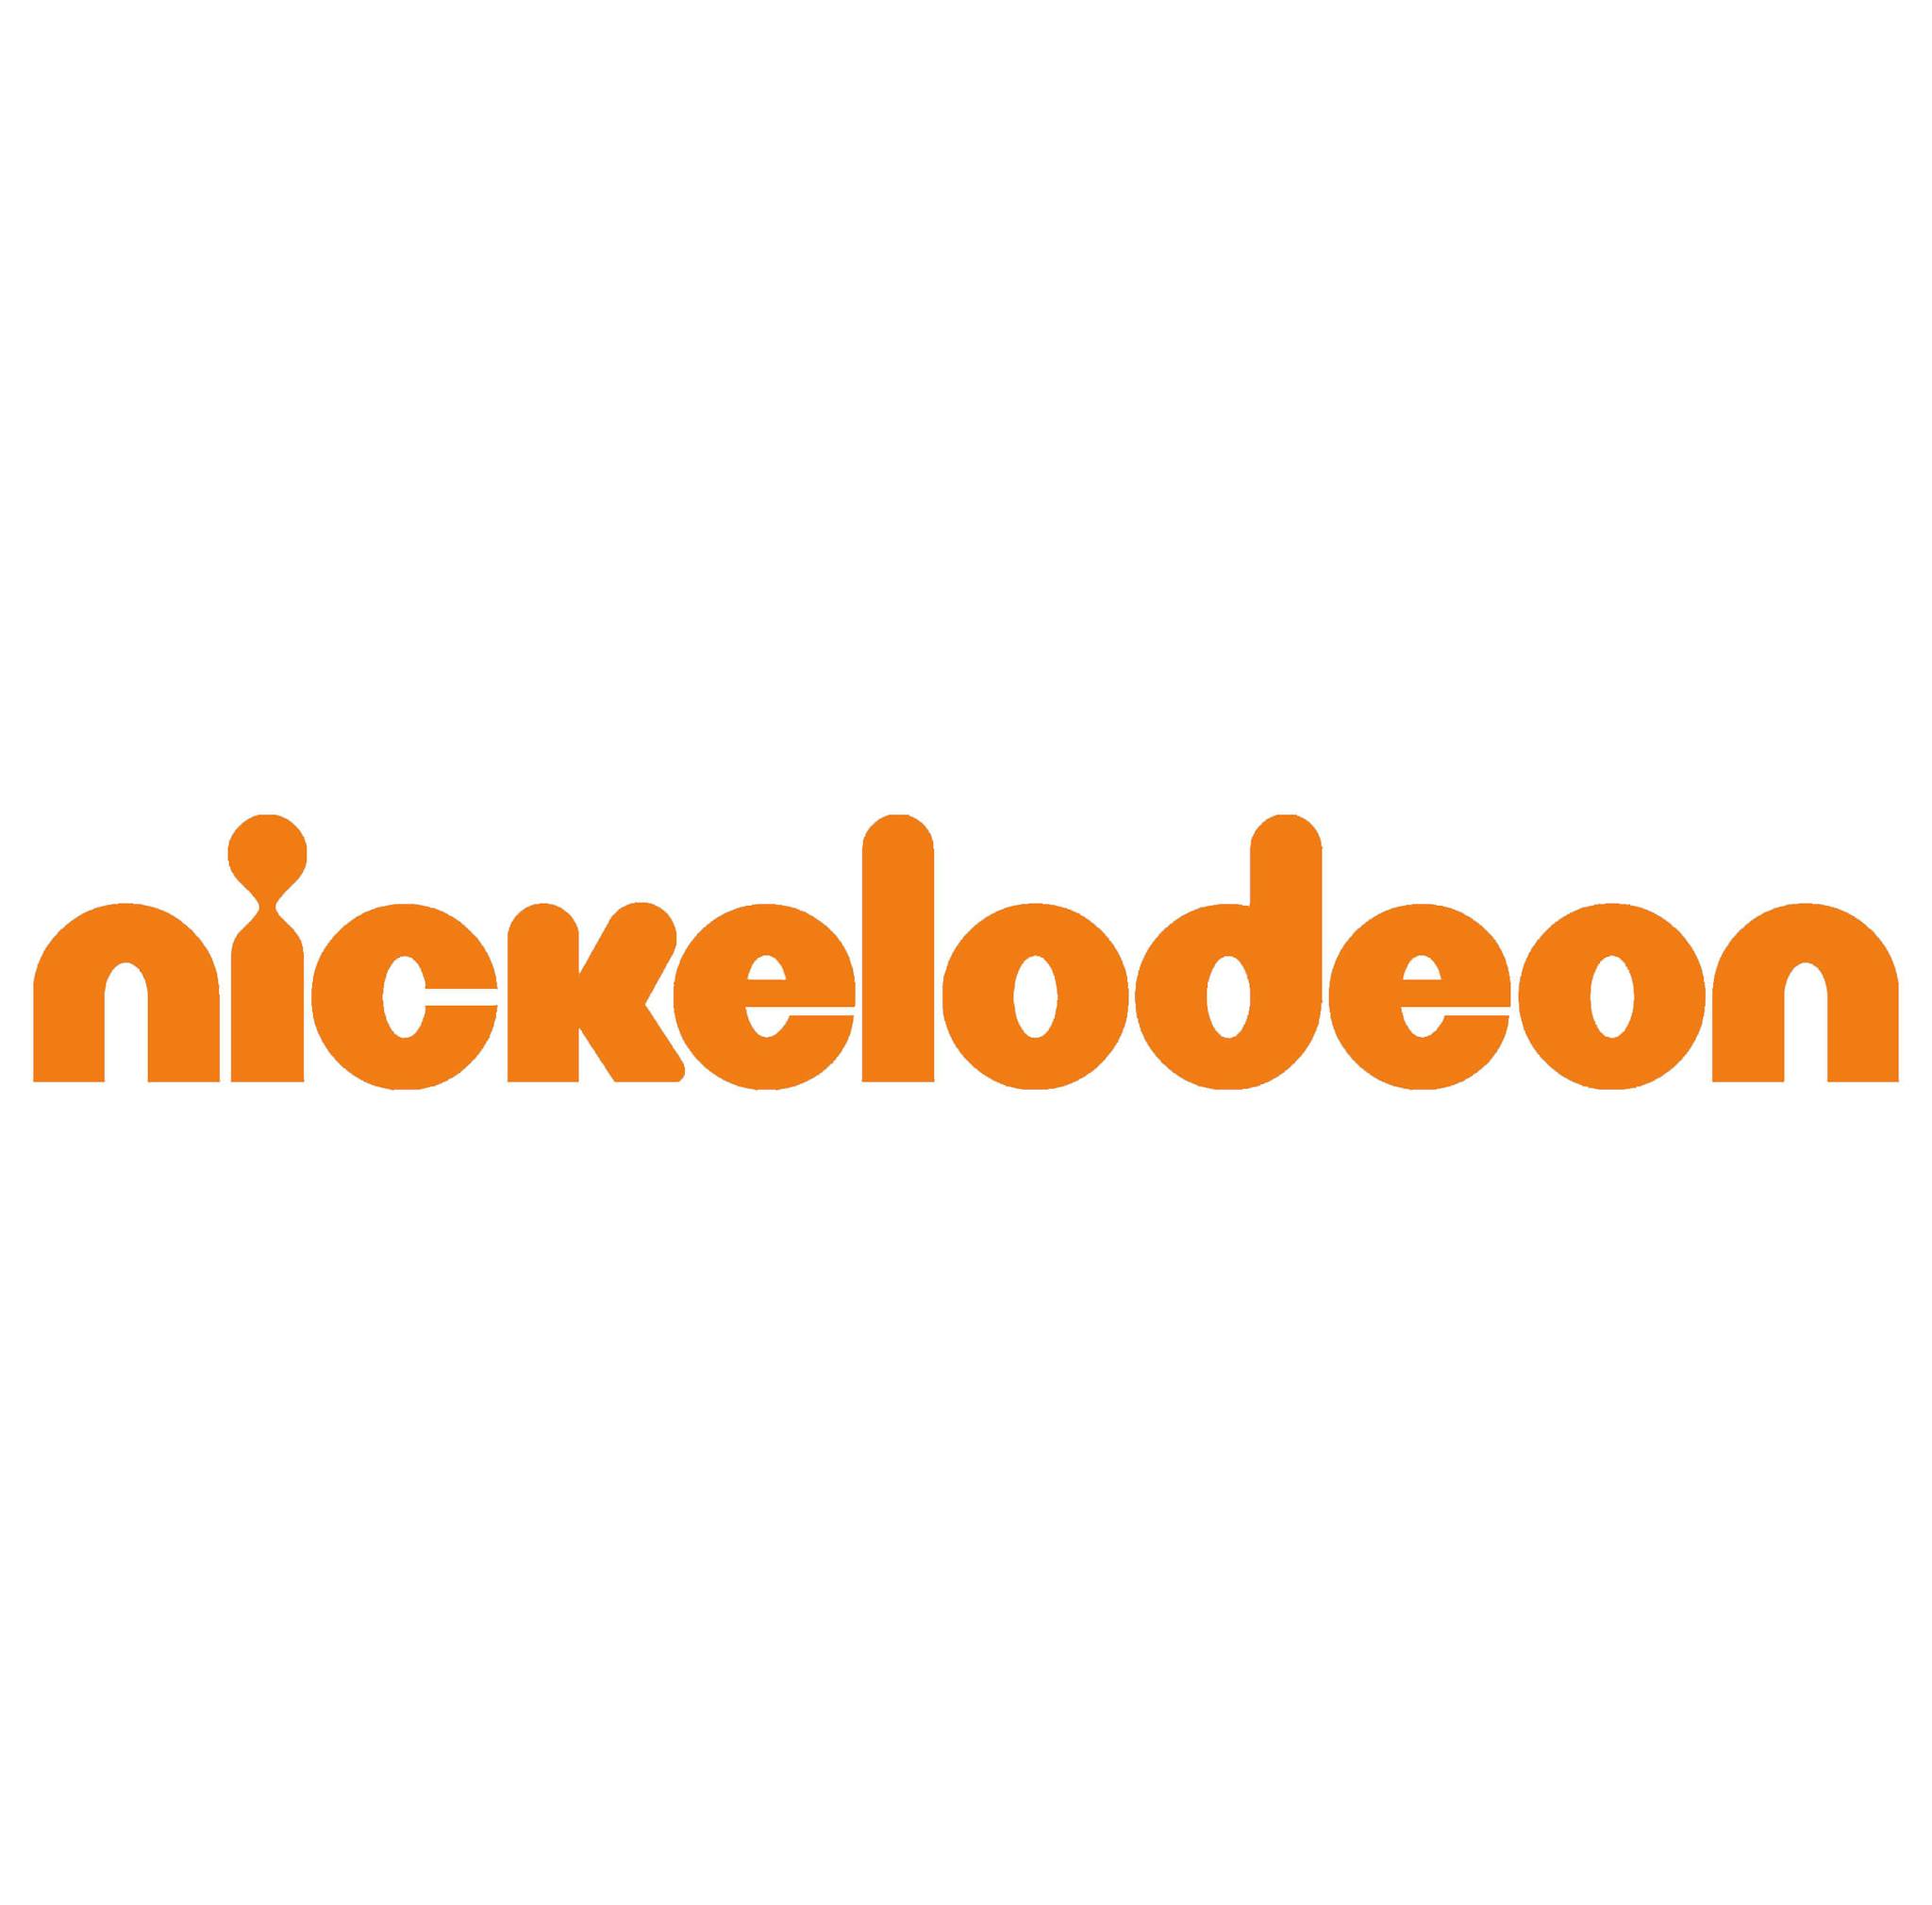 Nickelodeon Live Stream: How to Watch Nickelodeon Online for Free